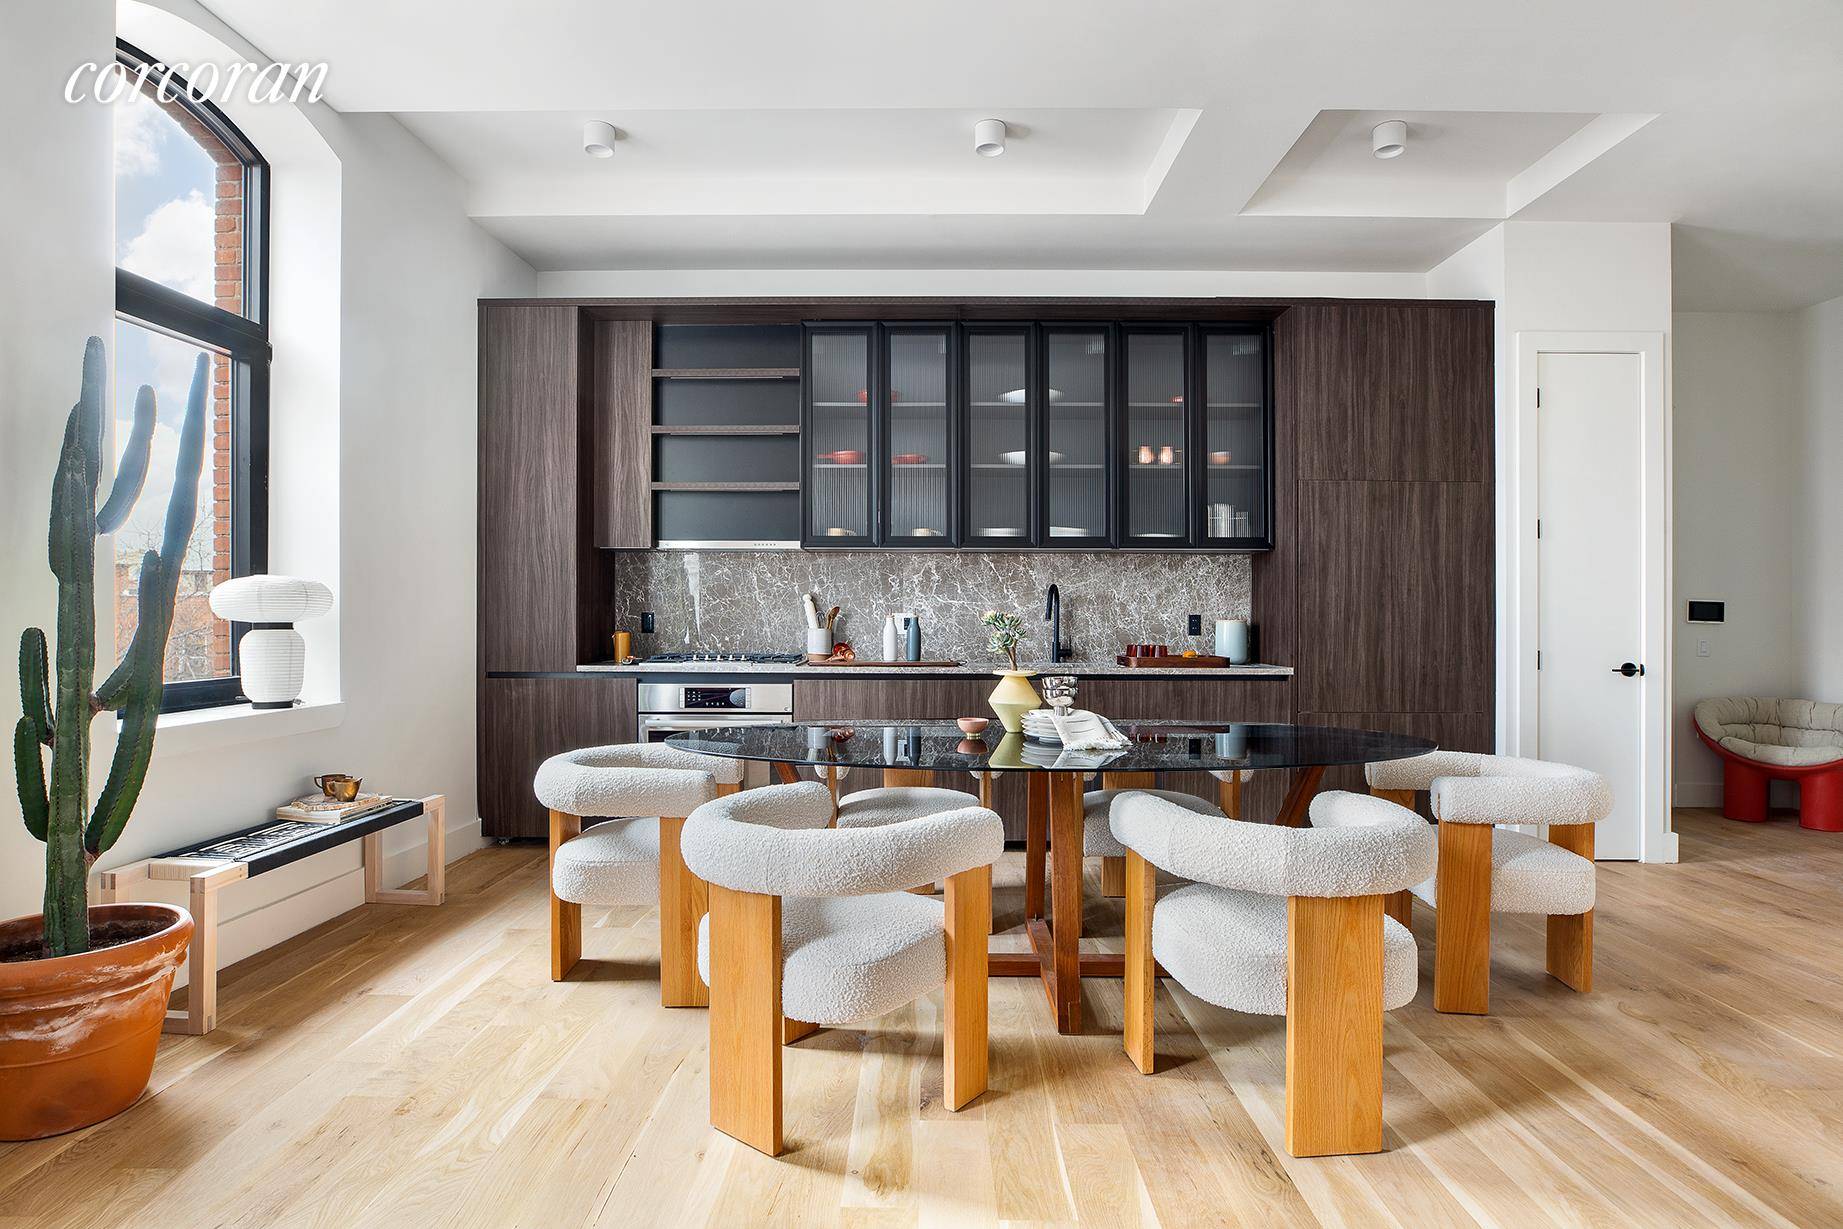 The new 10 Quincy Street The Salvation Lofts is a rare and architecturally captivating authentic loft condo conversion, located on a quiet corner in one of Brooklyn's most picturesque neighborhoods, ...